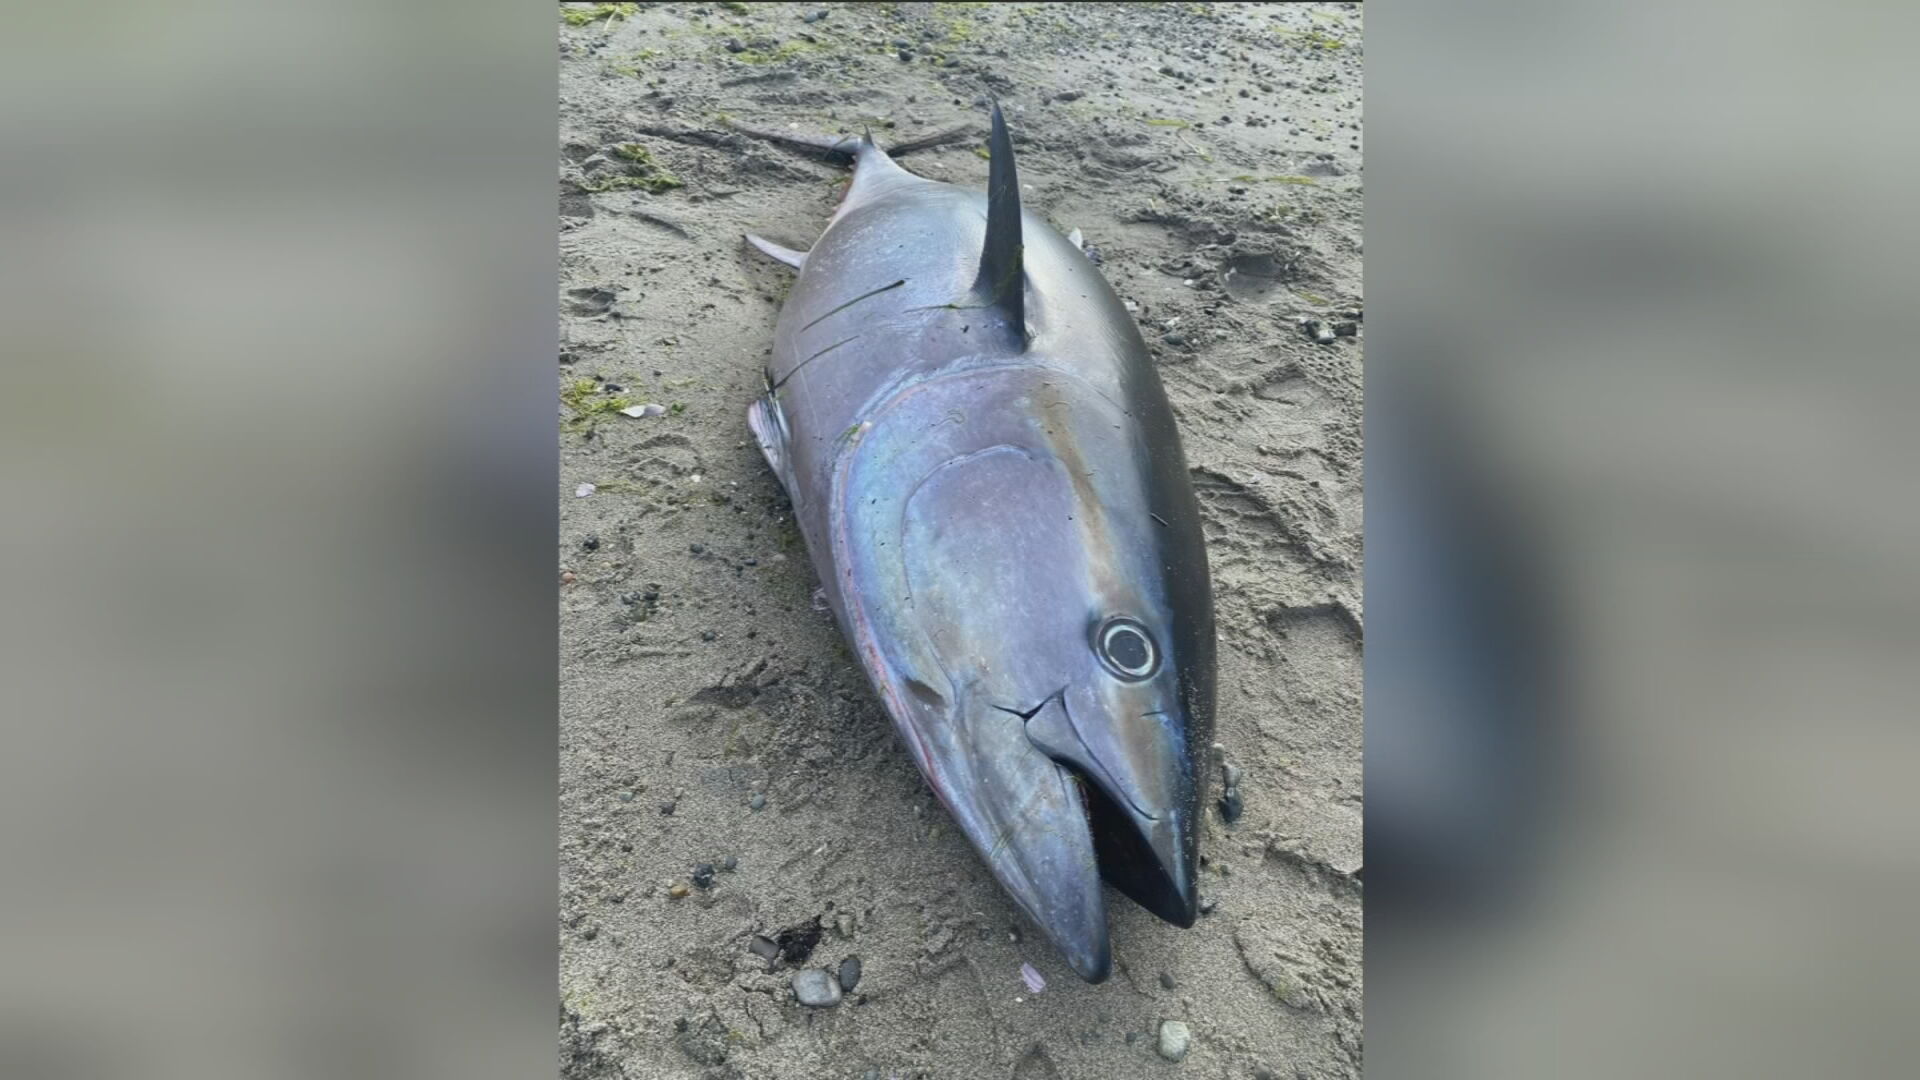 Mystery of 200-pound bluefin tuna washed up on Orcas Island finally begins  to unravel – KIRO 7 News Seattle